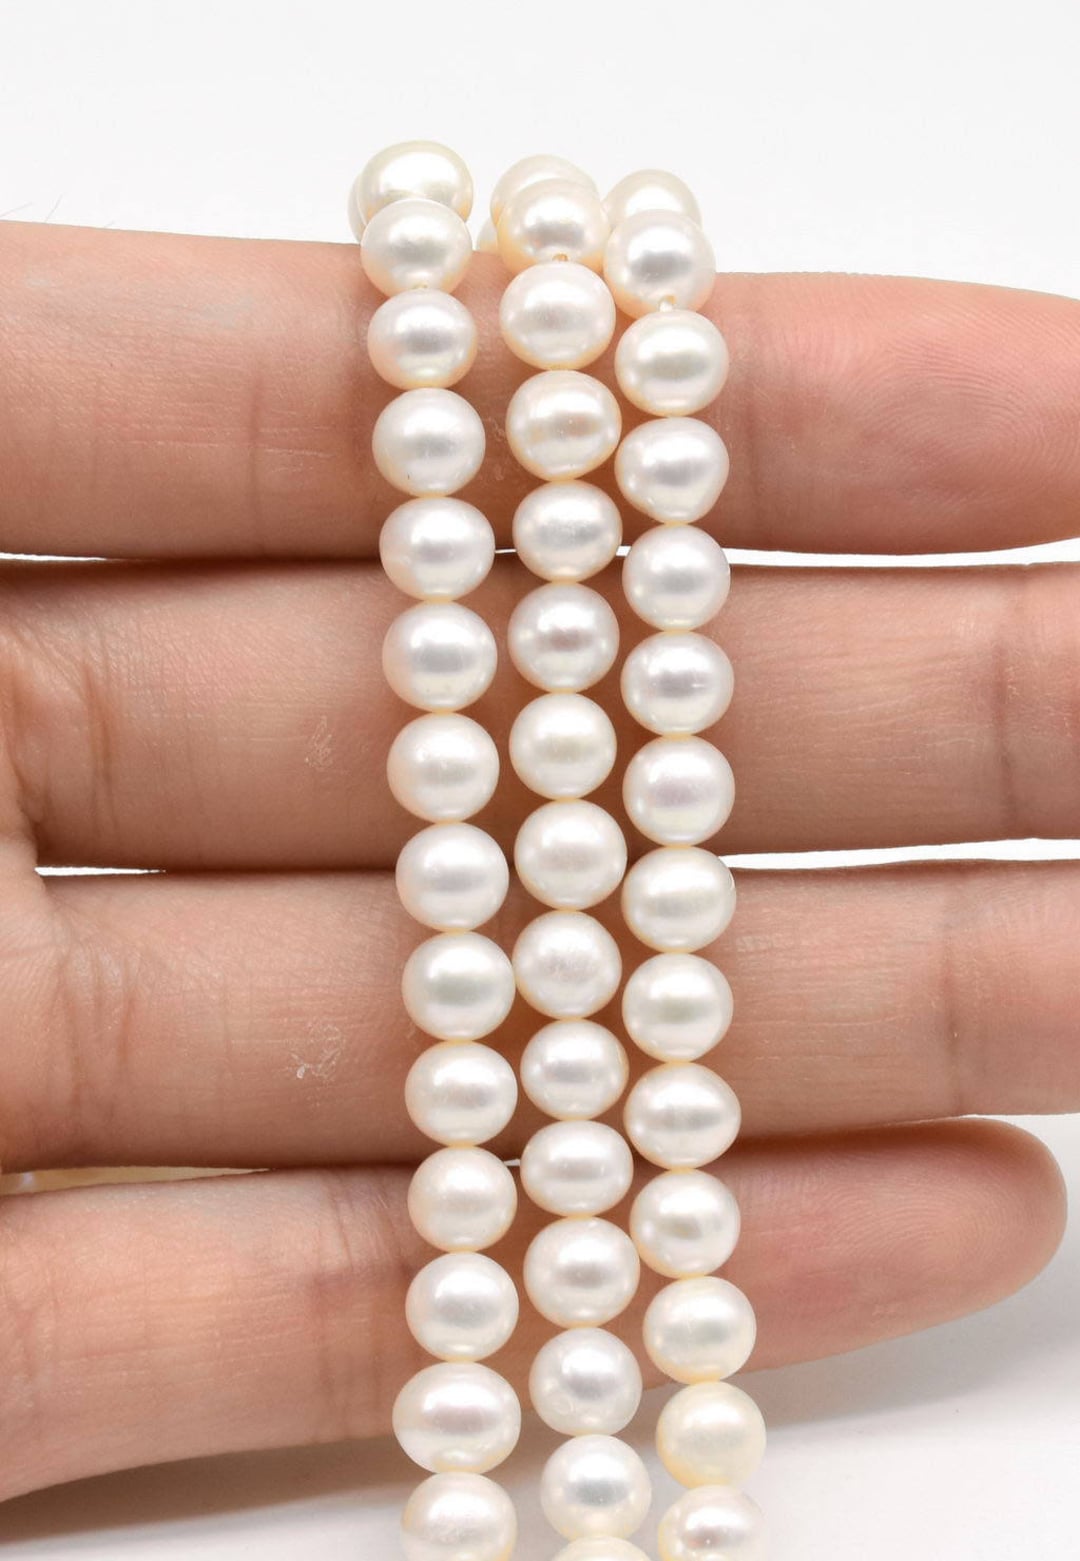 Adabele 1 Strand Real Natural AAA Grade Round White Cultured Freshwater  Pearl Loose Beads 6-7mm for Jewelry Making 14 inch FPA-67